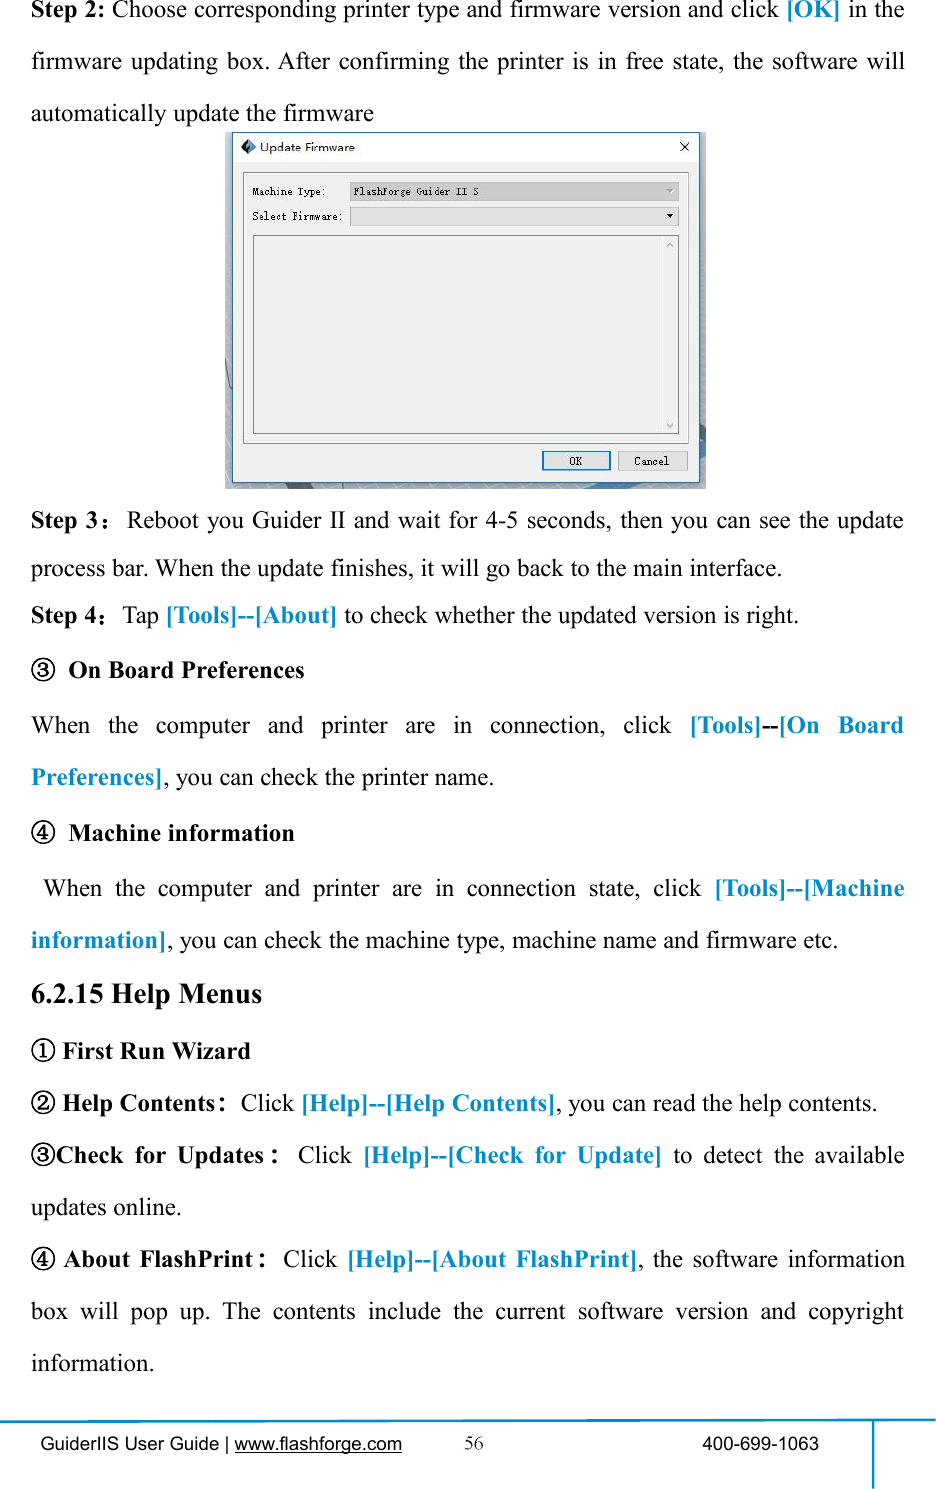 GuiderIIS User Guide | www.flashforge.com 400-699-1063Step 2: Choose corresponding printer type and firmware version and click [OK] in thefirmware updating box. After confirming the printer is in free state, the software willautomatically update the firmwareStep 3：Reboot you Guider Ⅱ and wait for 4-5 seconds, then you can see the updateprocess bar. When the update finishes, it will go back to the main interface.Step 4：Tap [Tools]--[About] to check whether the updated version is right.③On Board PreferencesWhen the computer and printer are in connection, click [Tools]--[On BoardPreferences], you can check the printer name.④Machine informationWhen the computer and printer are in connection state, click [Tools]--[Machineinformation], you can check the machine type, machine name and firmware etc.6.2.15 Help Menus①First Run Wizard②Help Contents：Click [Help]--[Help Contents], you can read the help contents.③Check for Updates ：Click [Help]--[Check for Update] to detect the availableupdates online.④About FlashPrint ：Click [Help]--[About FlashPrint], the software informationbox will pop up. The contents include the current software version and copyrightinformation.